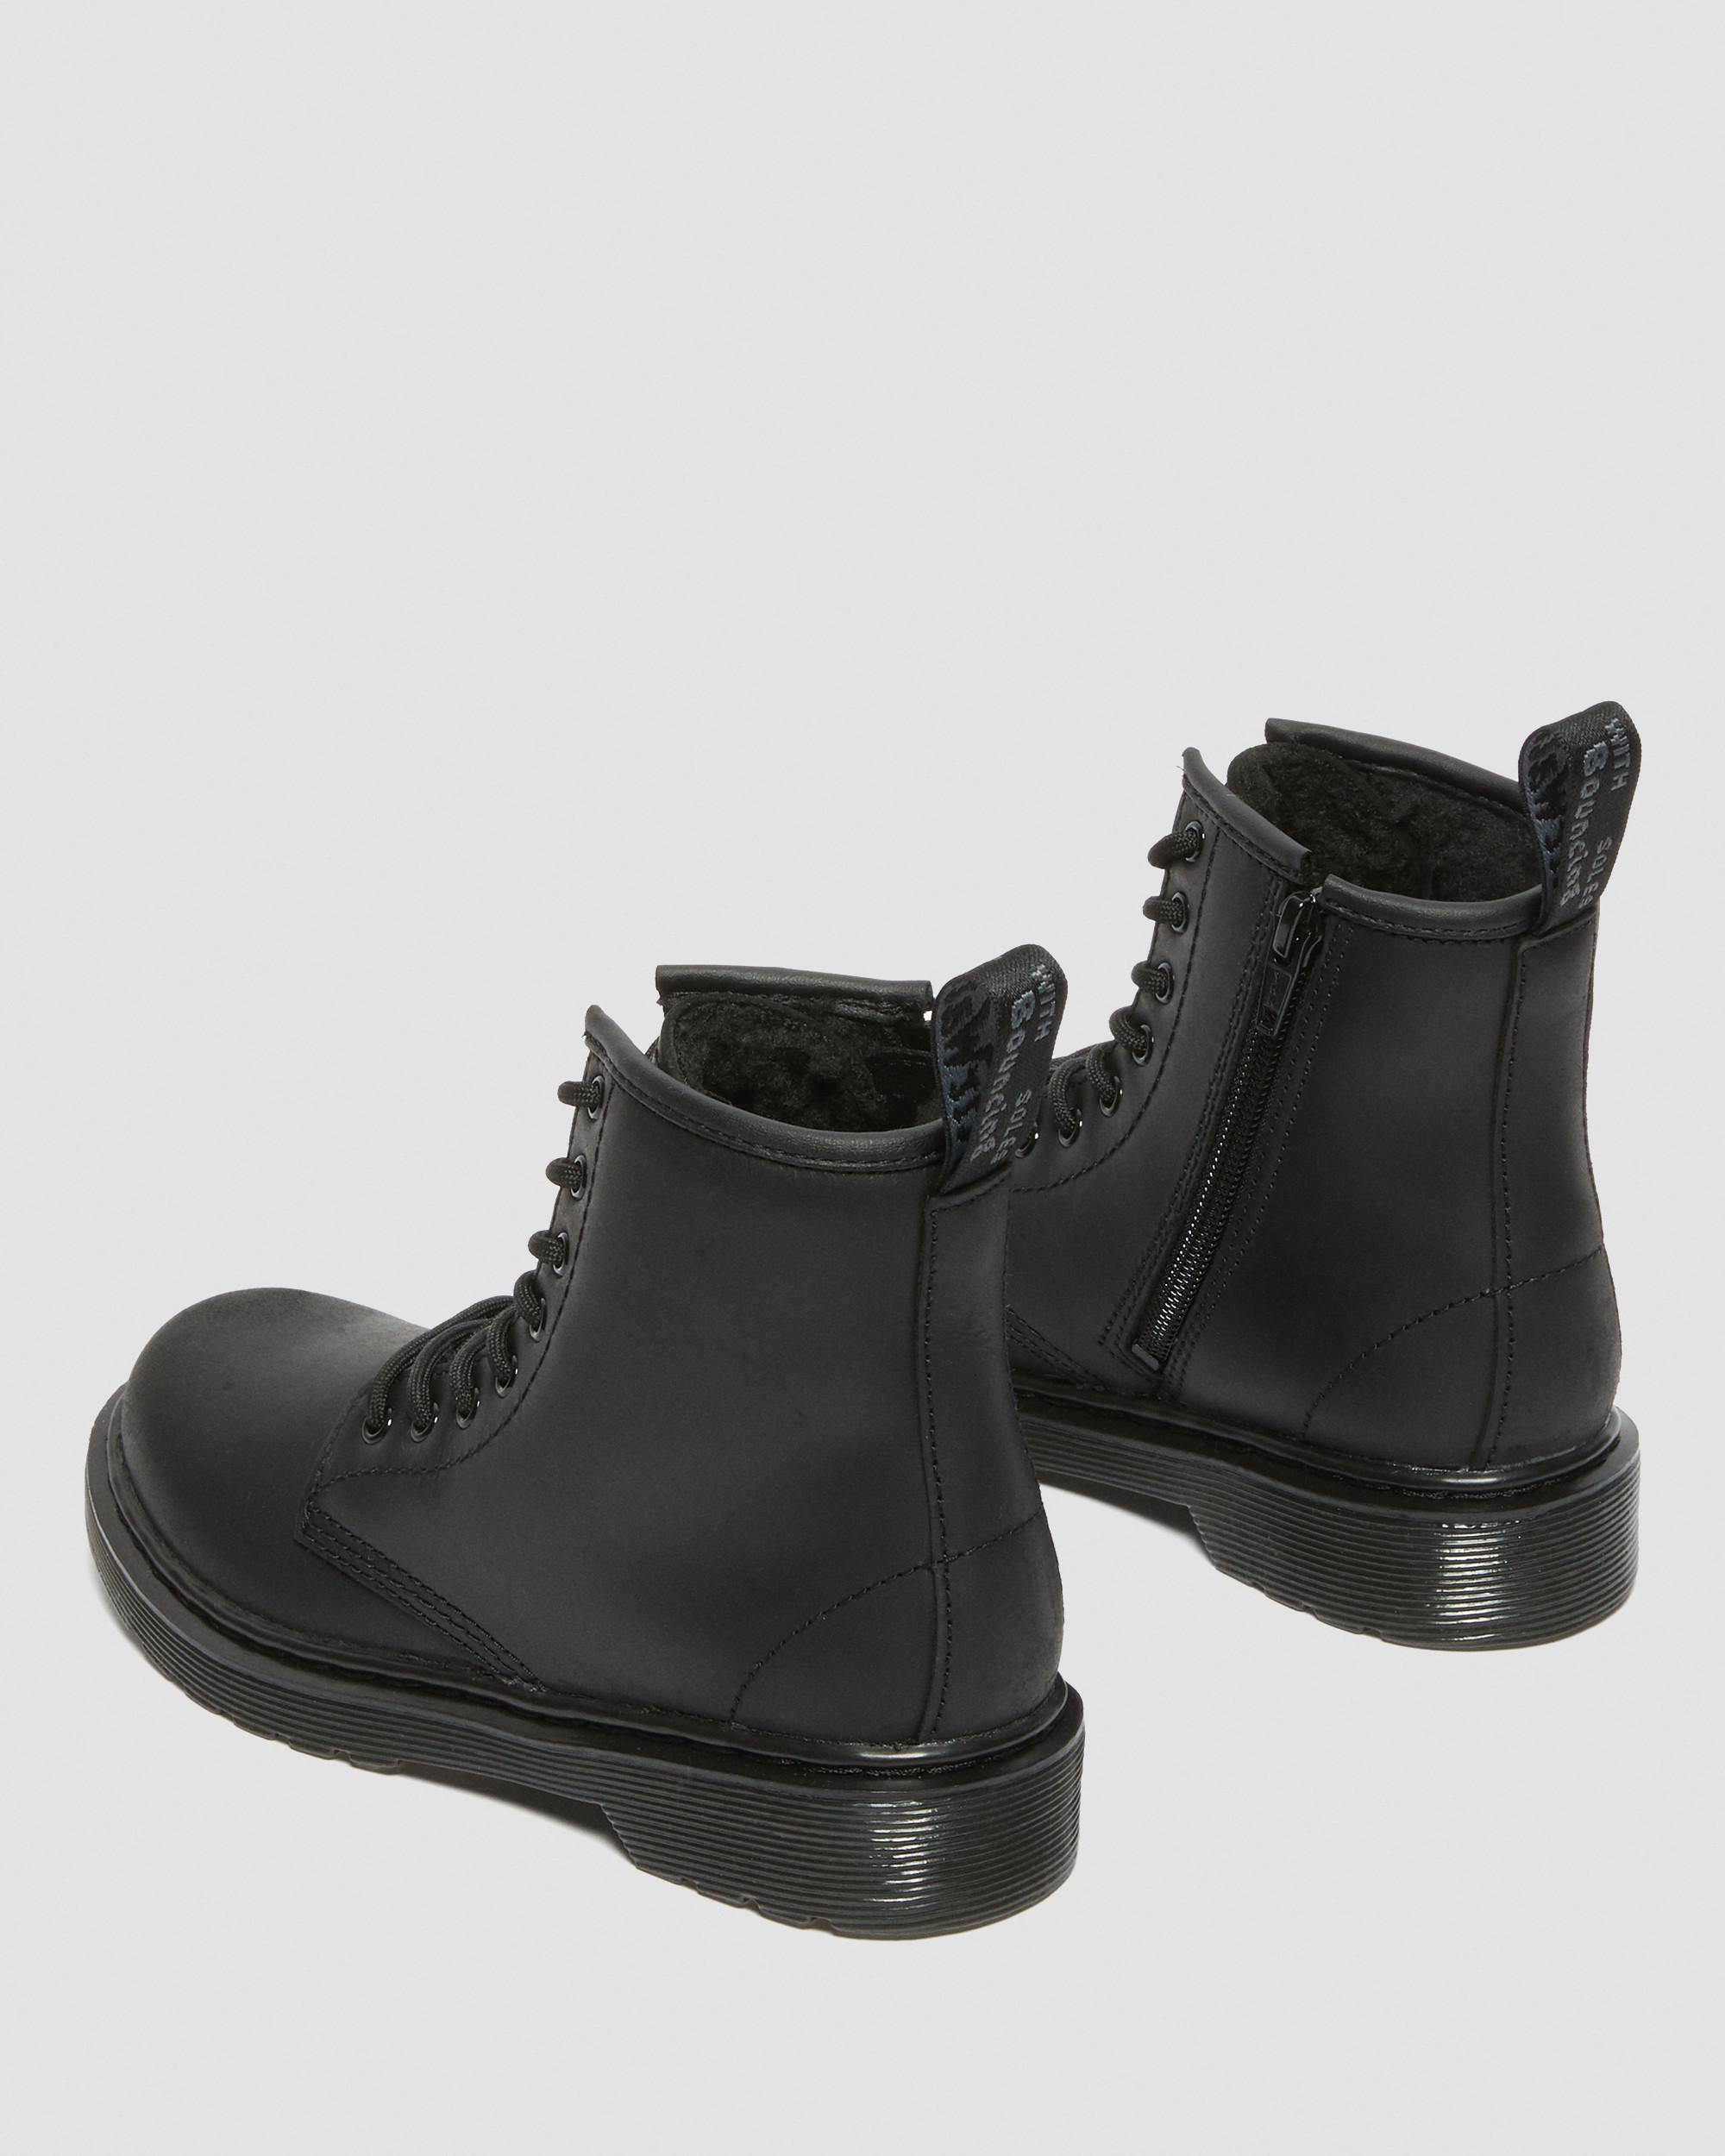 https://i1.adis.ws/i/drmartens/26040001.87.jpg?$large$Junior 1460 Serena Faux Fur Lined Leather Boots Dr. Martens